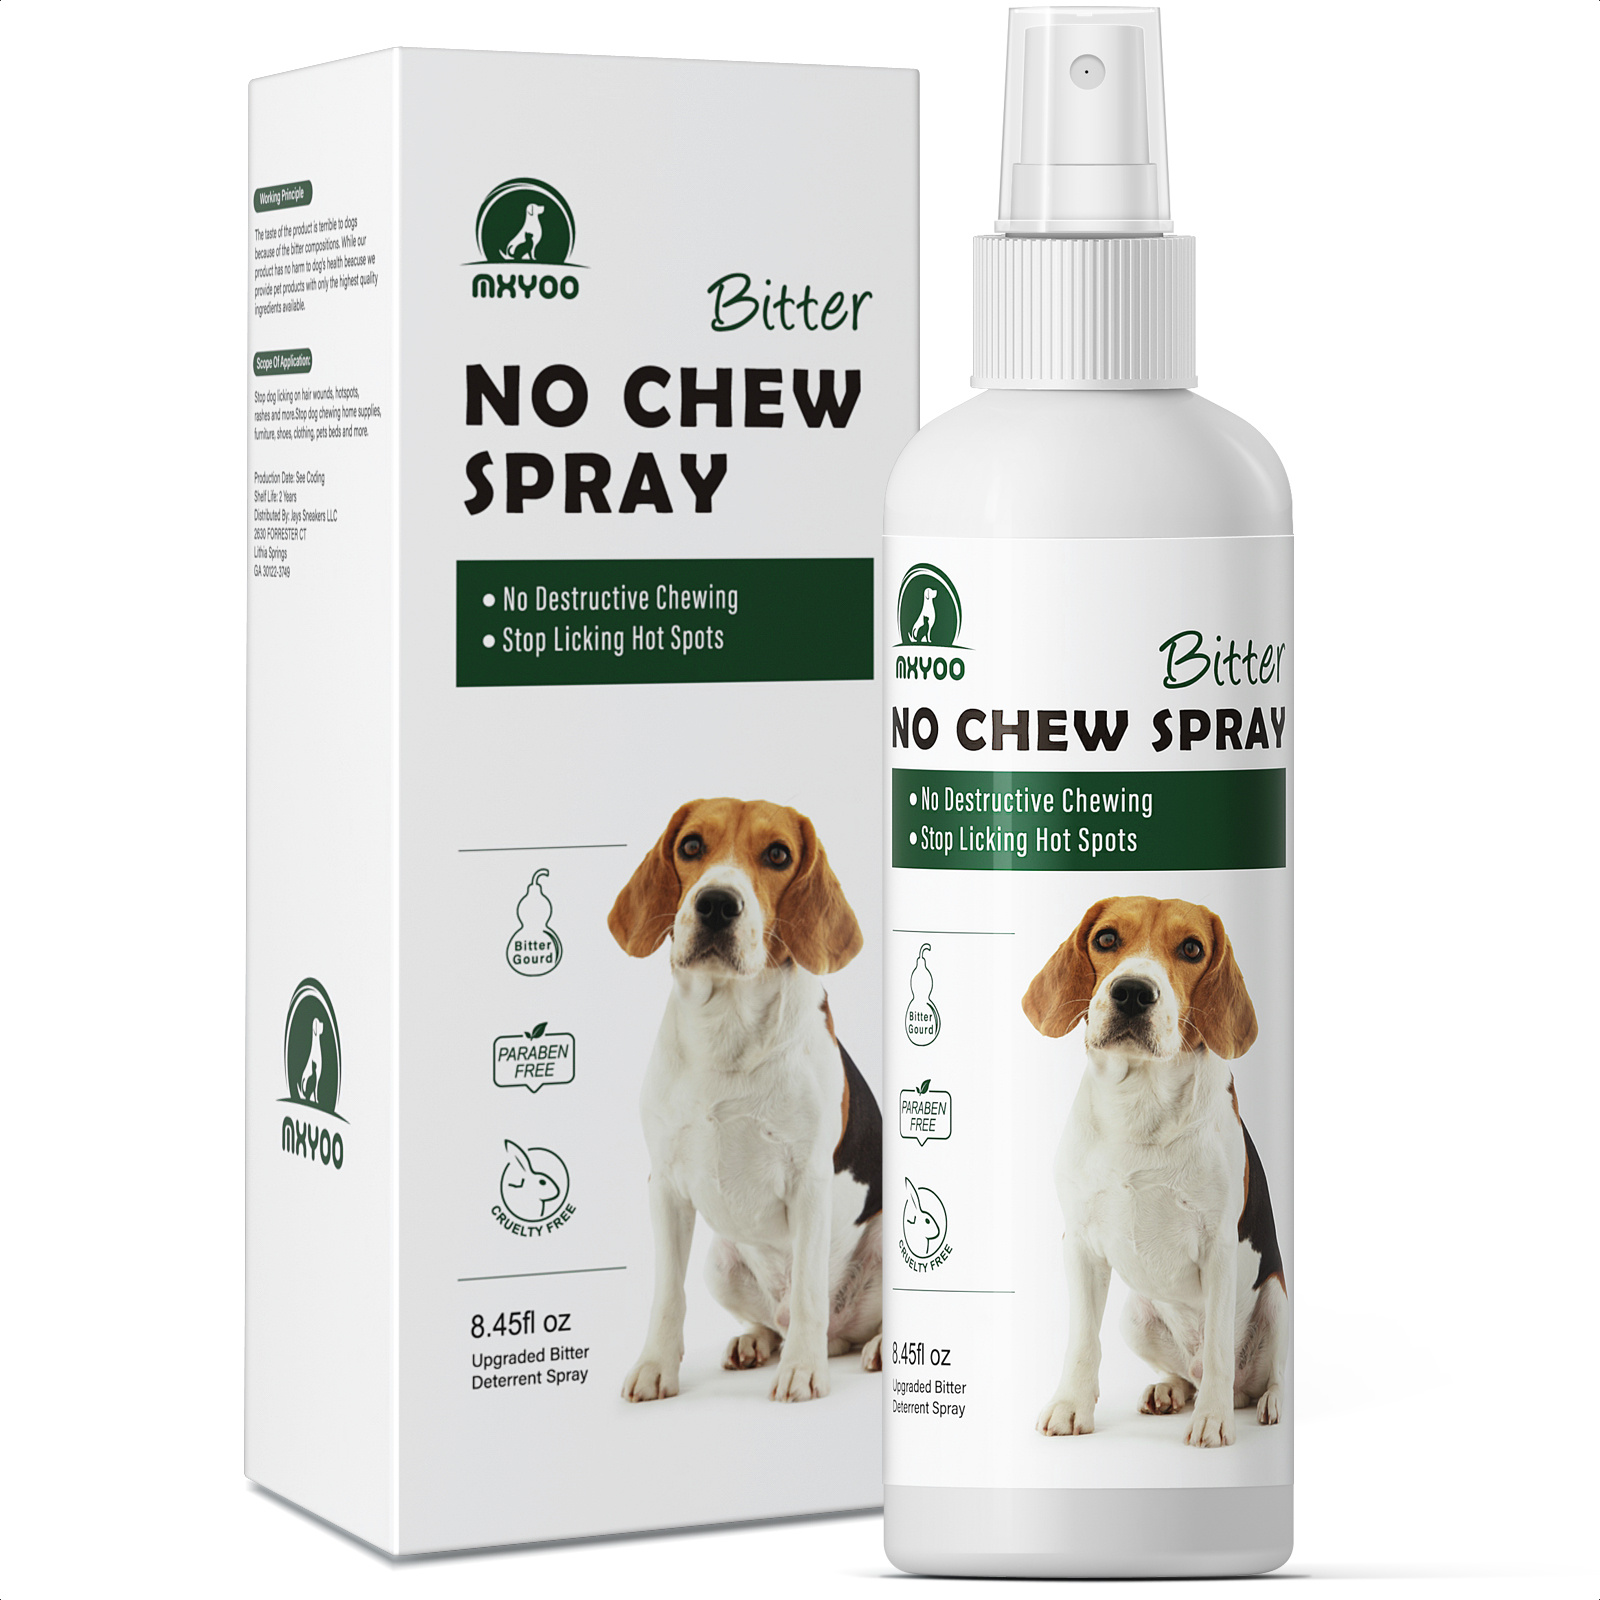 

Bitter Spray For Dogs To Stop Chewing, No Chew Spray For Puppies And Cats, Powerful Bitter Deterrent Stop Pets From Chewing On Furniture, Shoes, No Licking Of Fur, , Wounds